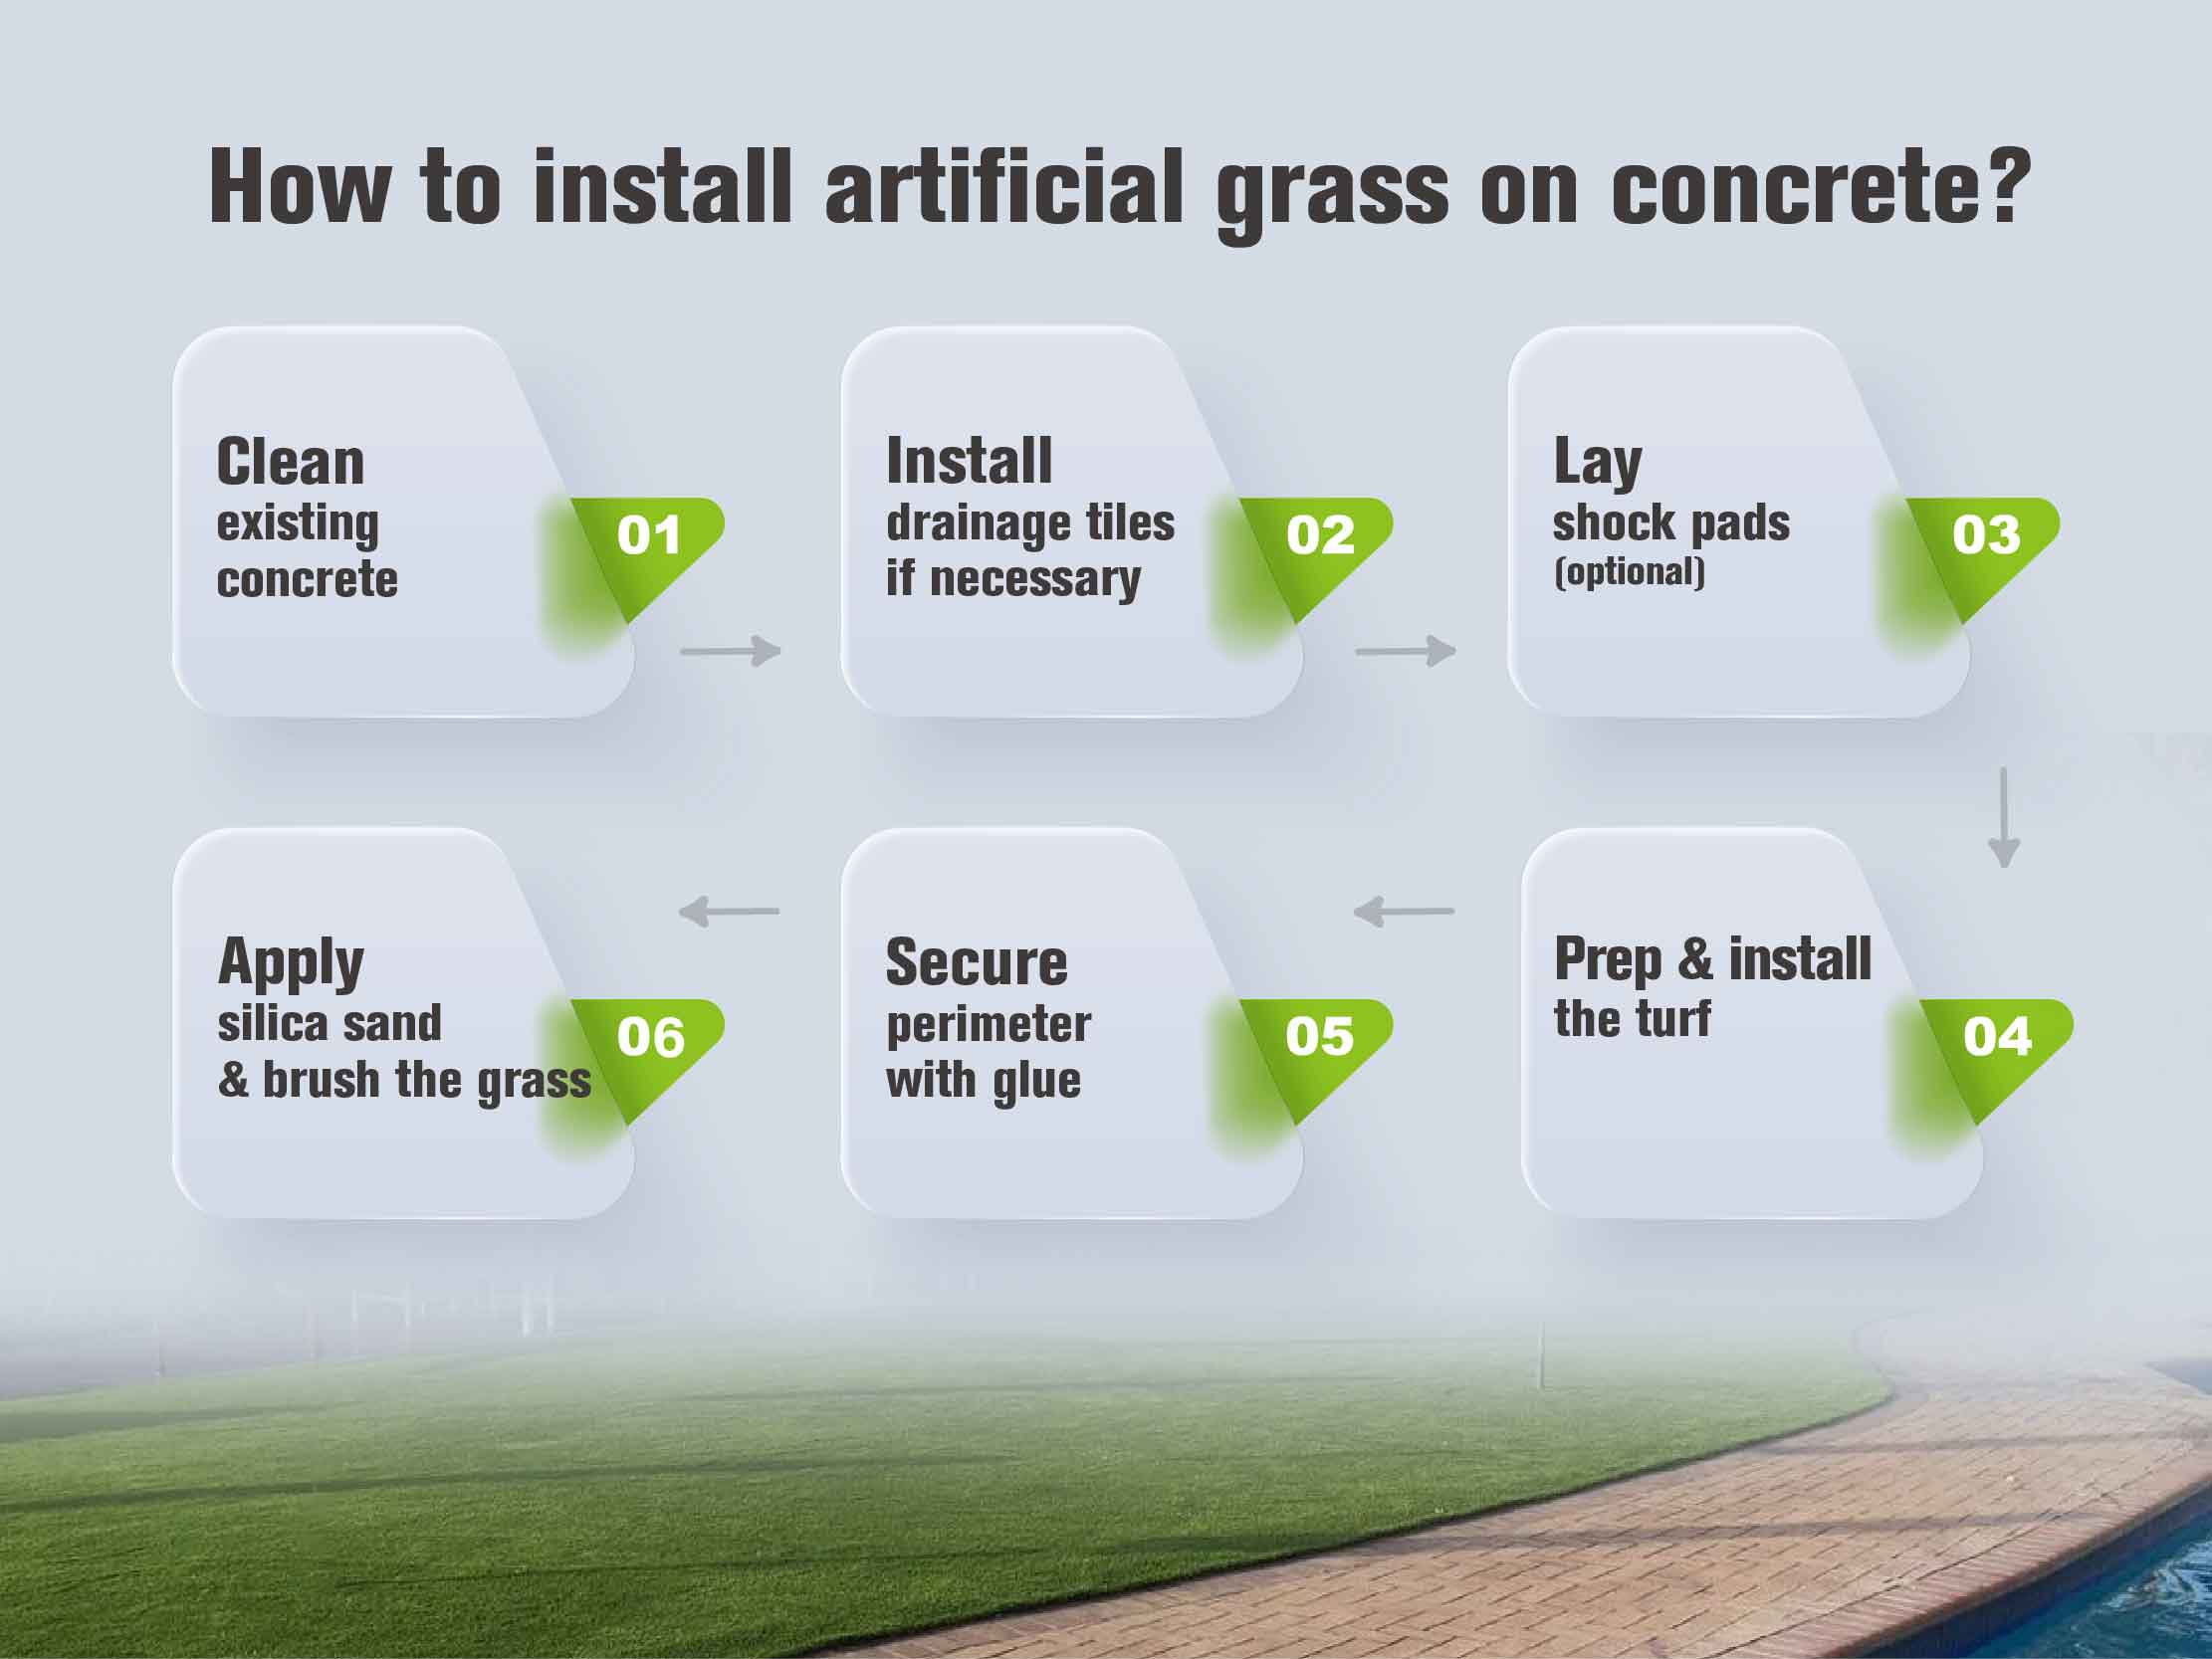 CCGrass, step-by-step guide on installing artificial grass on concrete